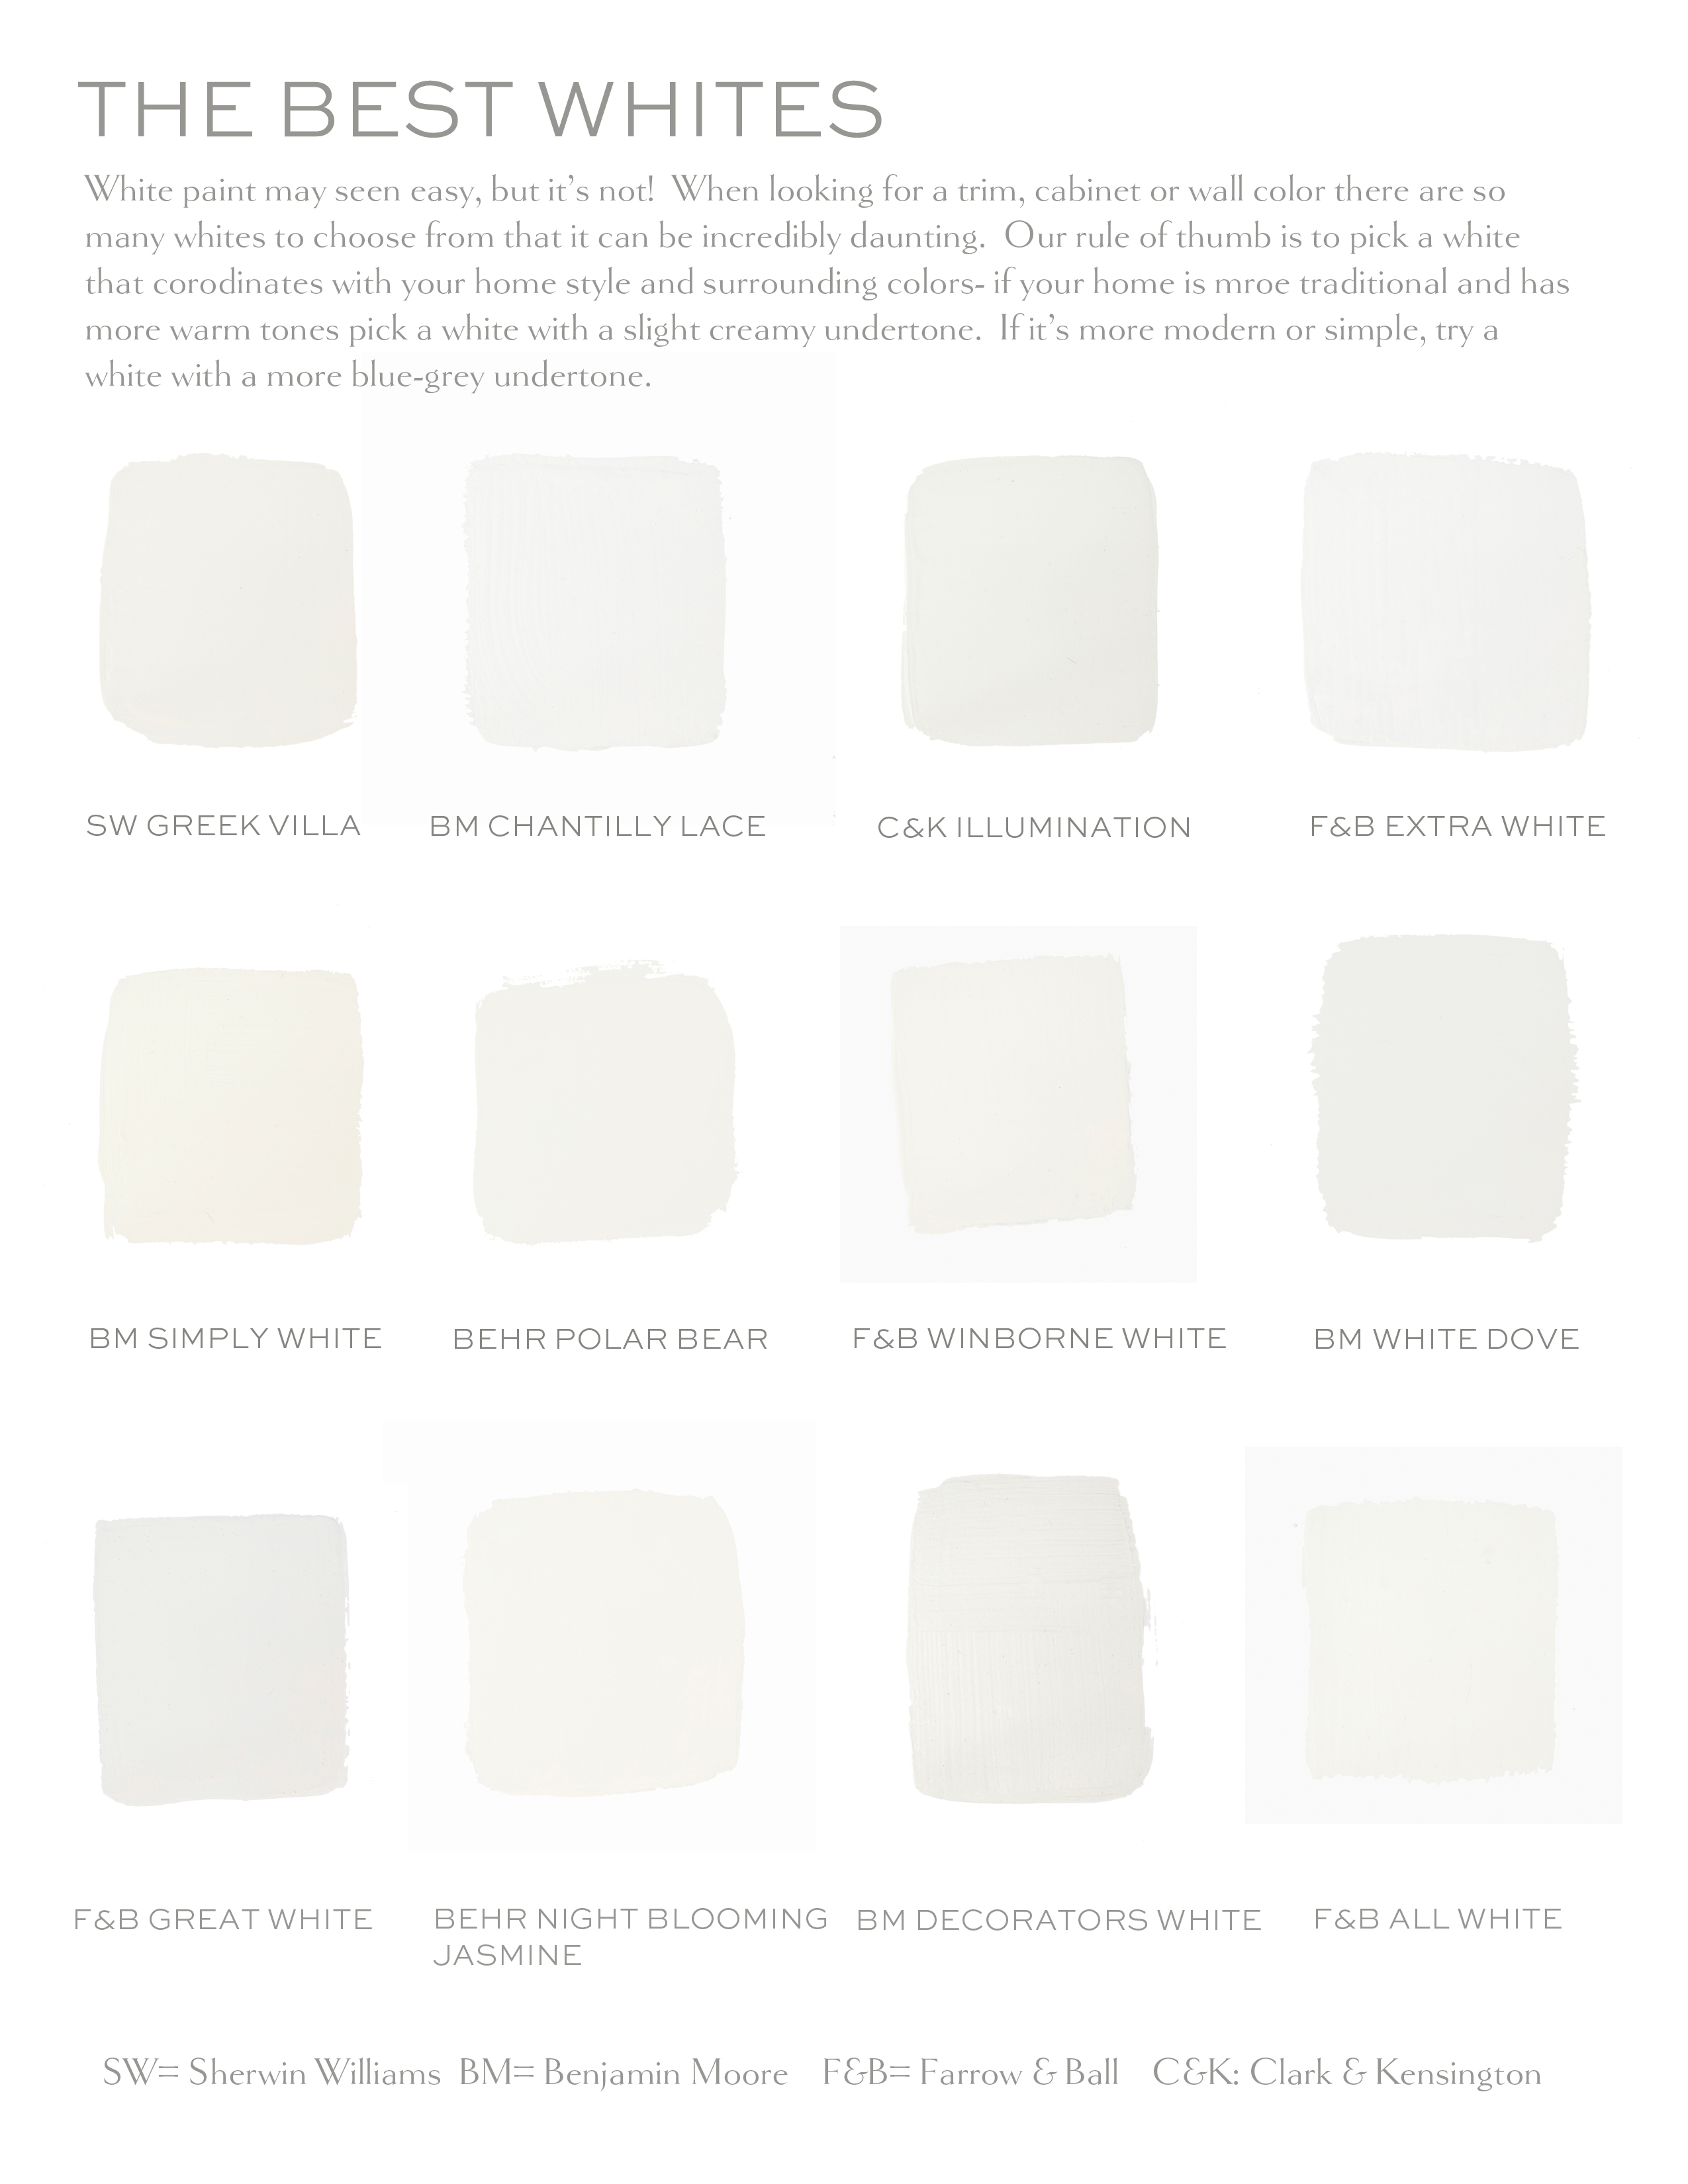 Elements of Style - My (Updated) White Paint Guide